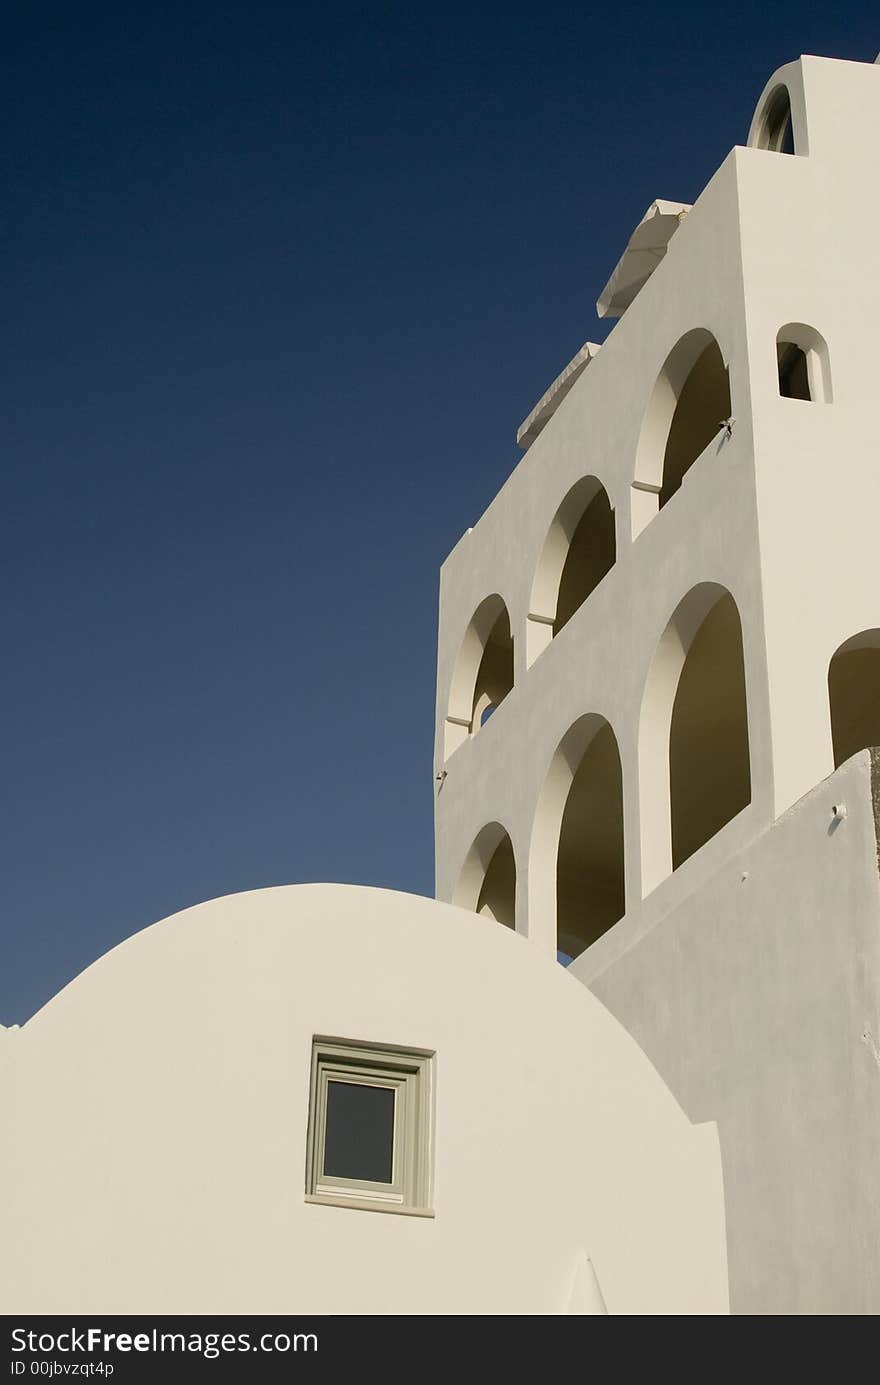 Greek island architecture cyclades building with arches white stucco